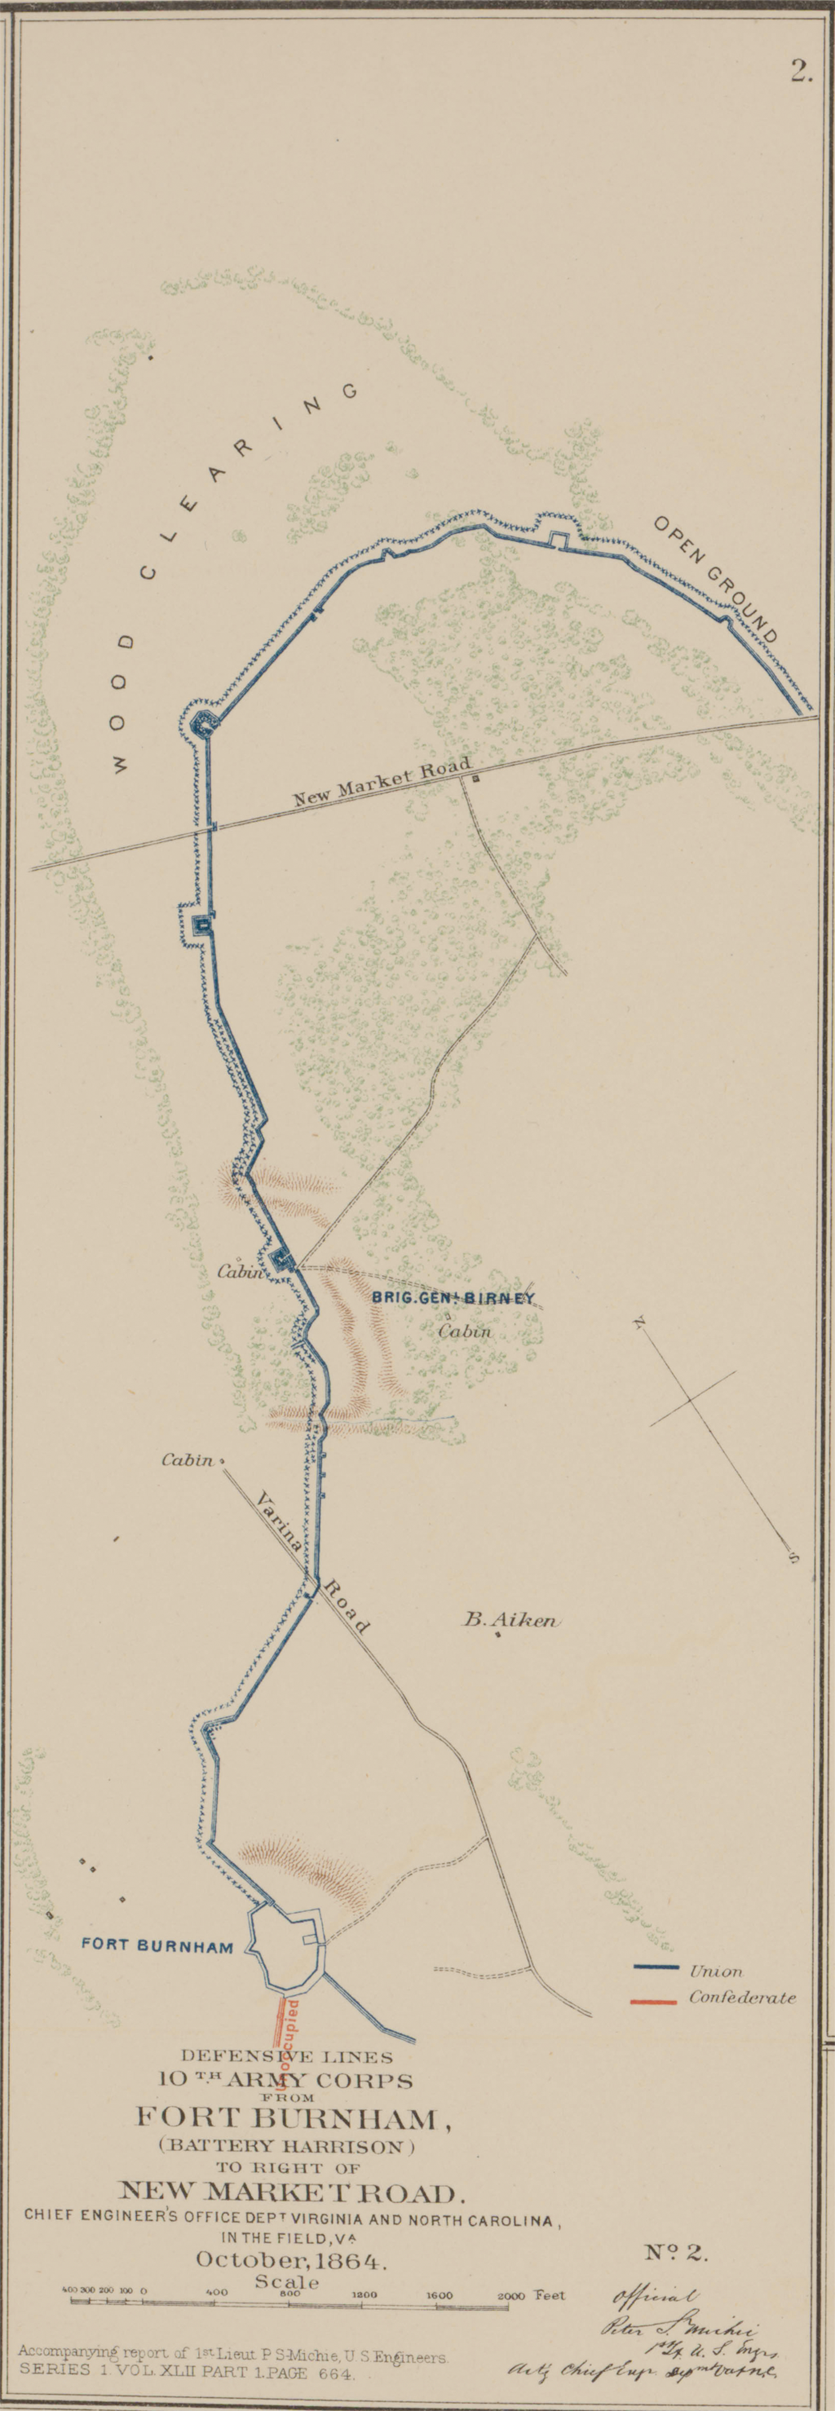 Defensive Lines 10th Army Corps from Fort Burnham (Battery Harrison) to Right of New Market Road October 1864 (OR Atlas 68:2)